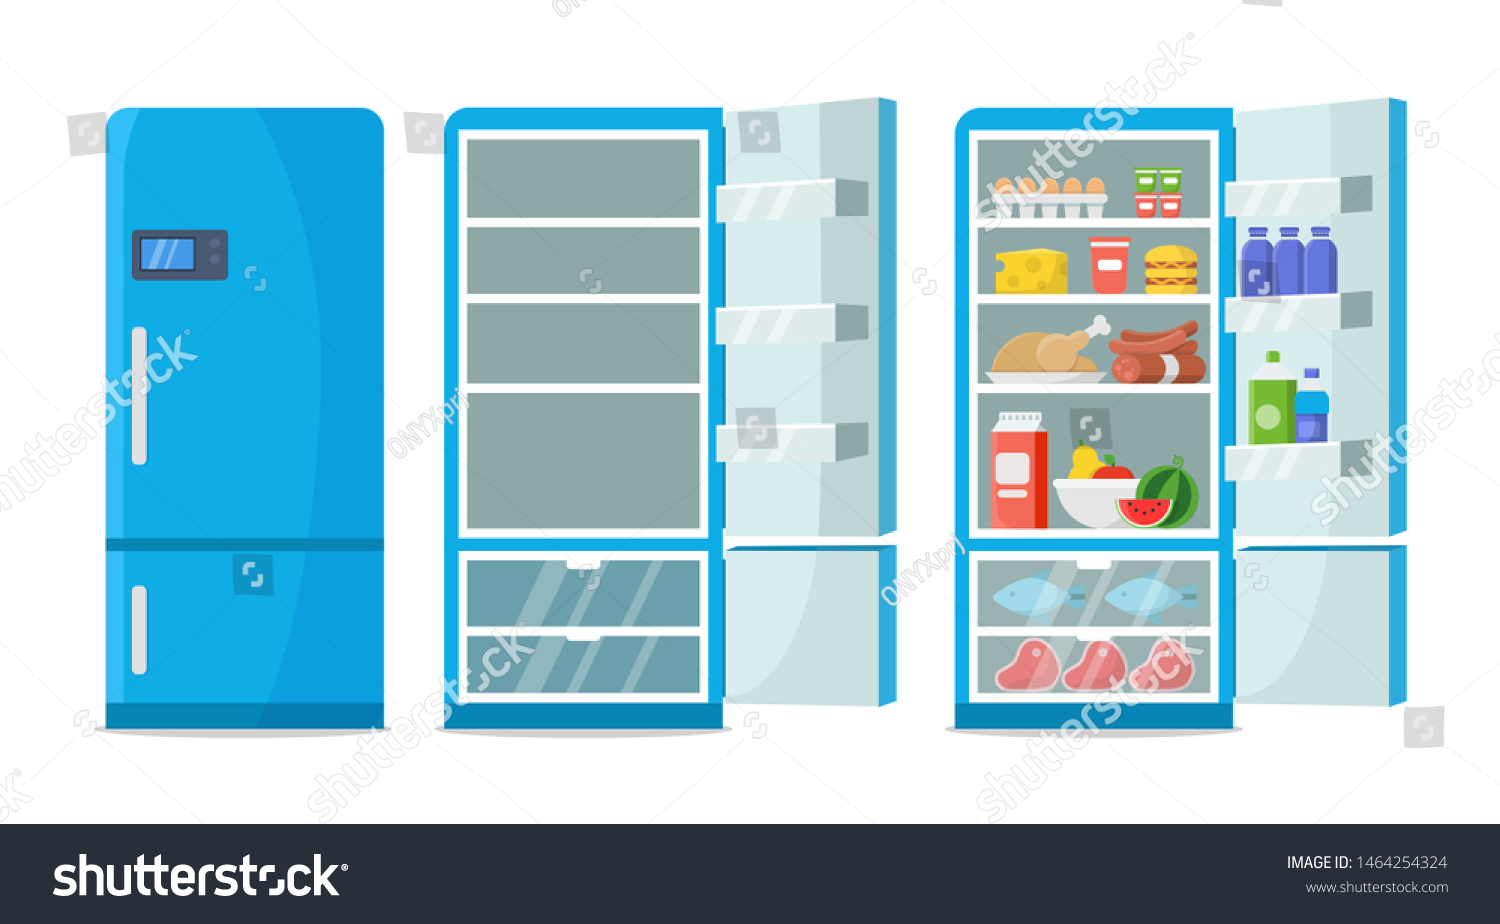 SVG of Flat fridge vector. Closed and open empty refrigerator. Blue fridge with healthy food, water, meet, vegetables. Illustration fridge with food or shelf empty svg